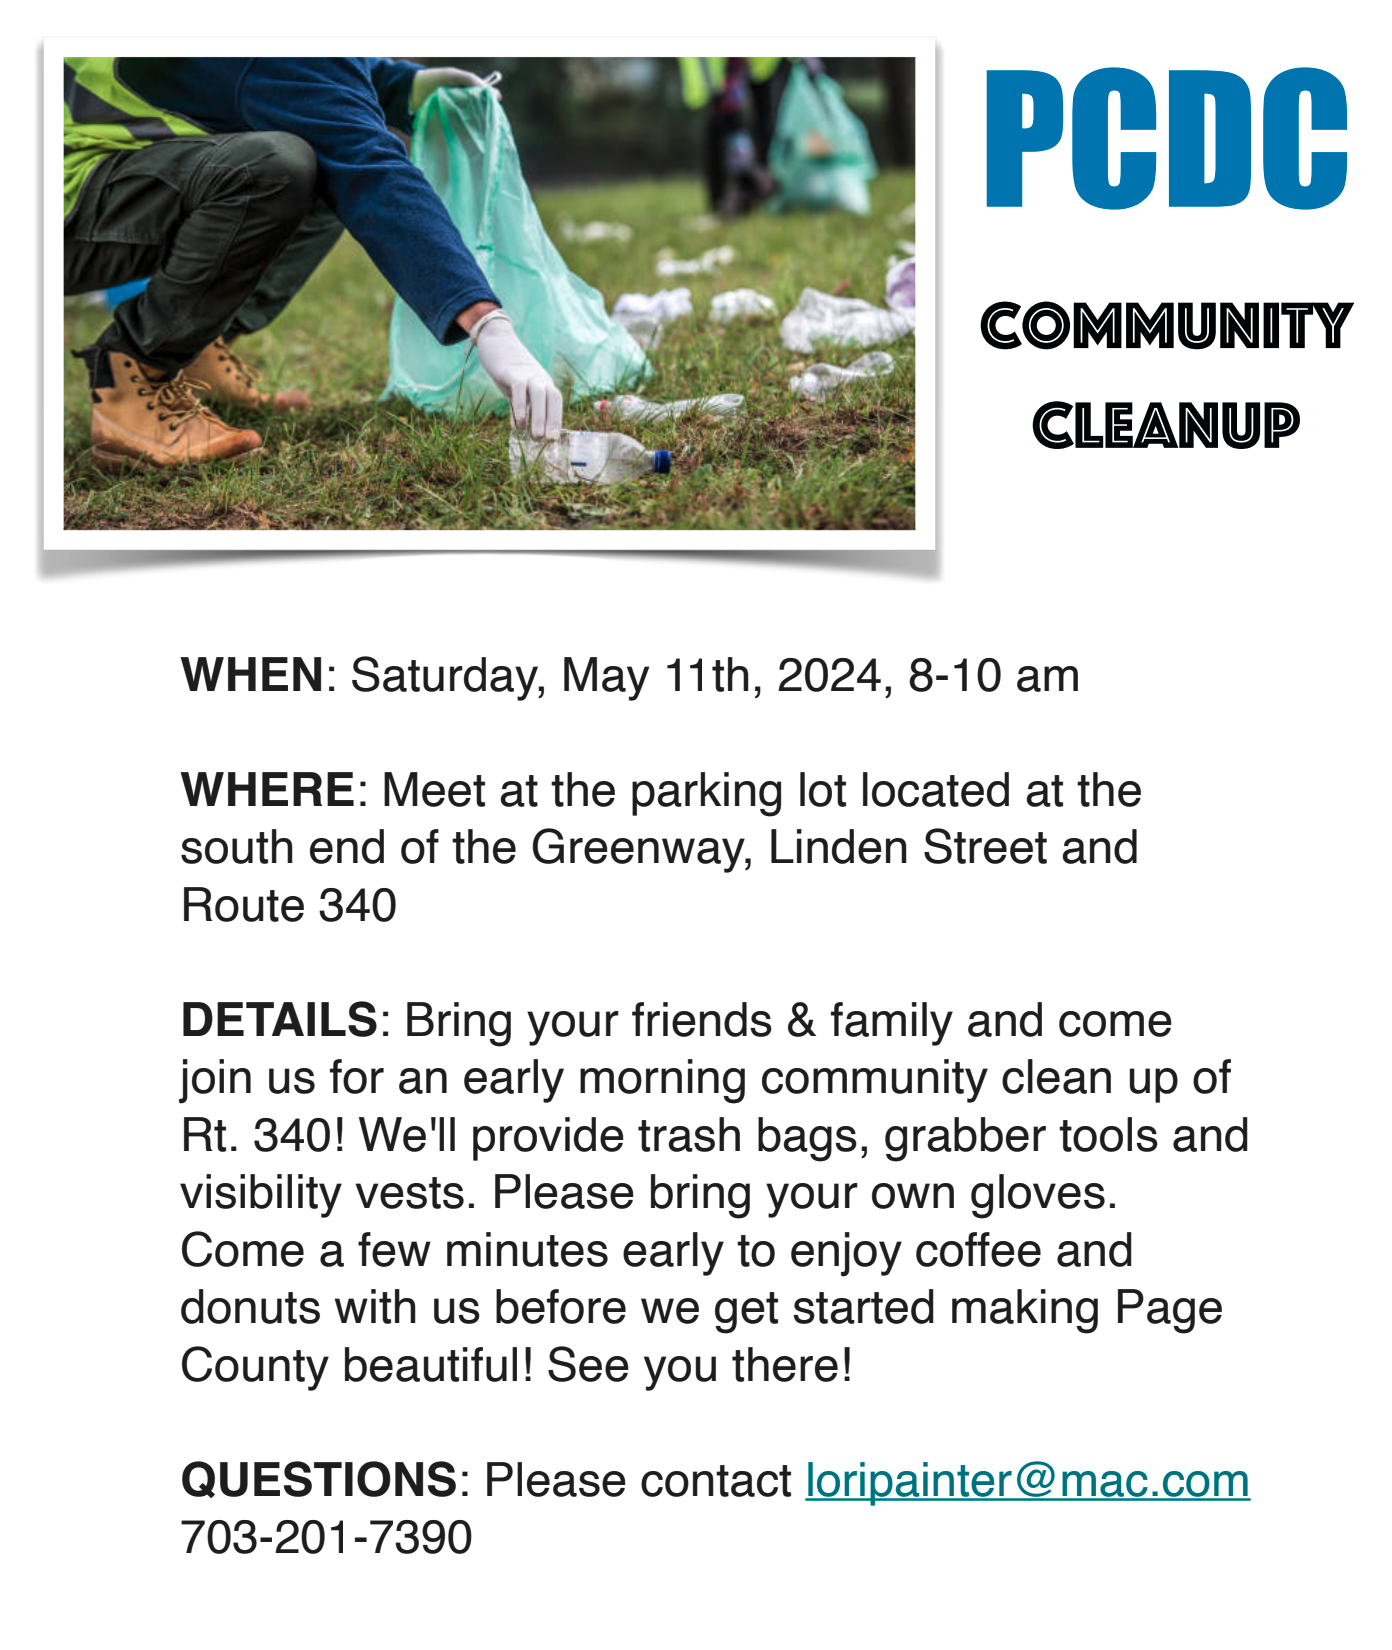 PCDC Cleanup